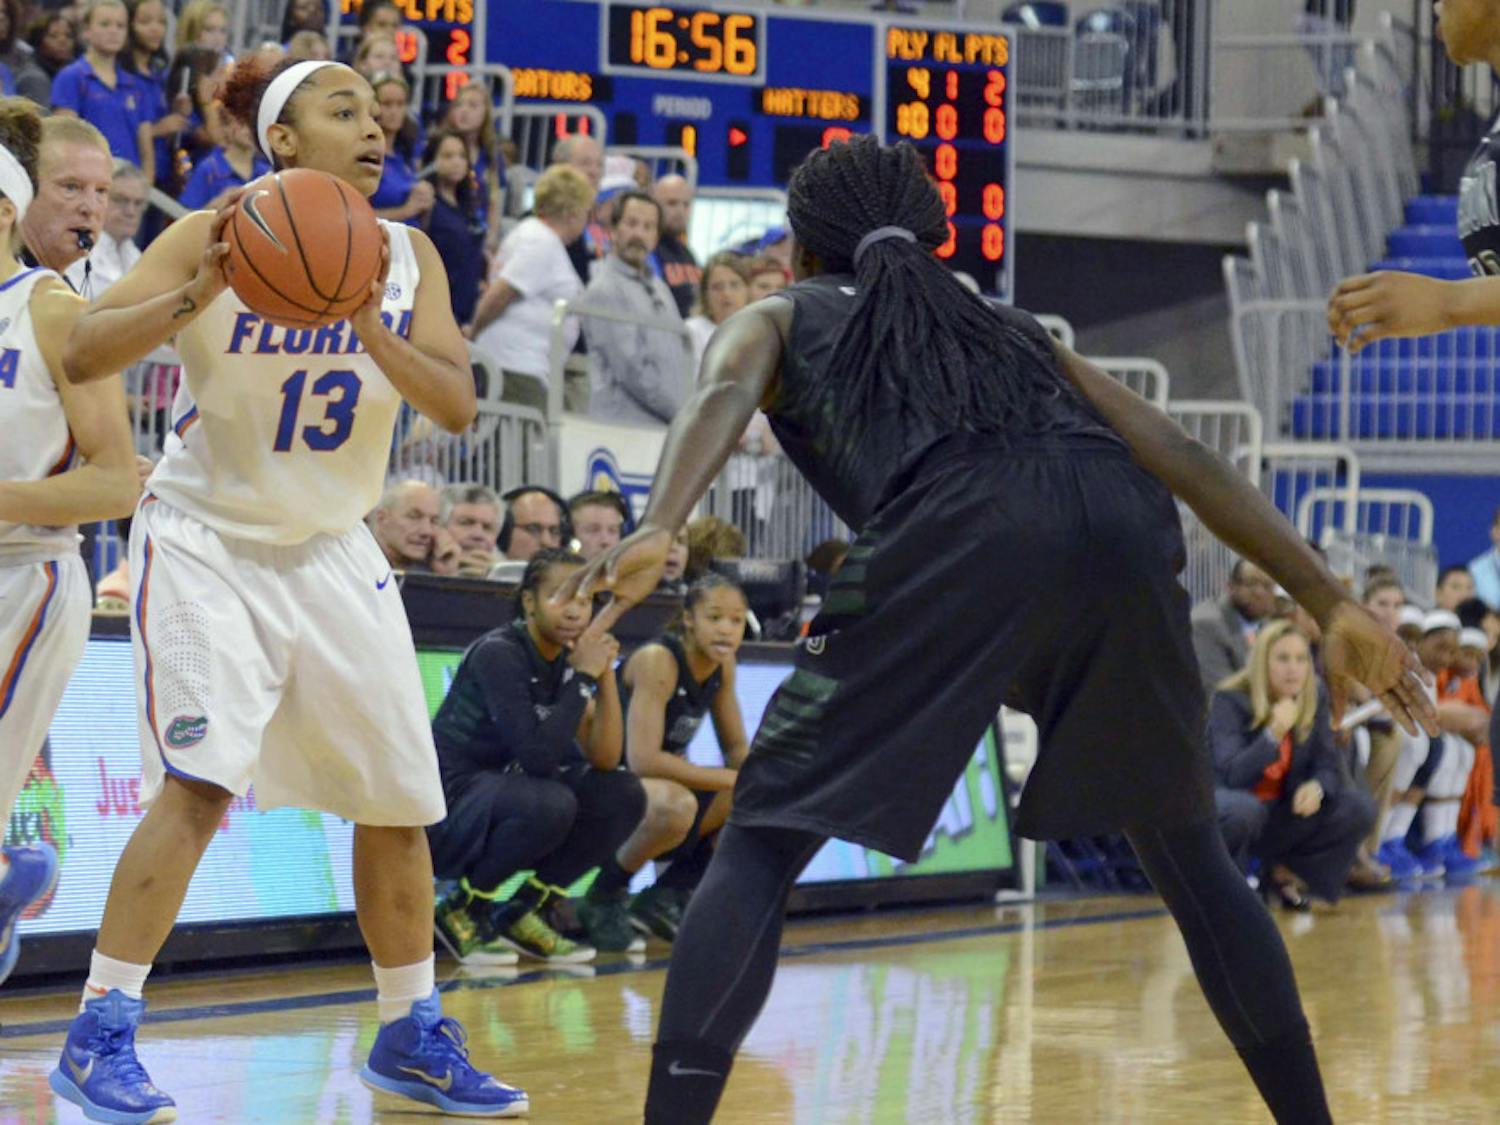 Cassie Peoples looks to pass the ball during Florida's win against Stetson on Dec. 14